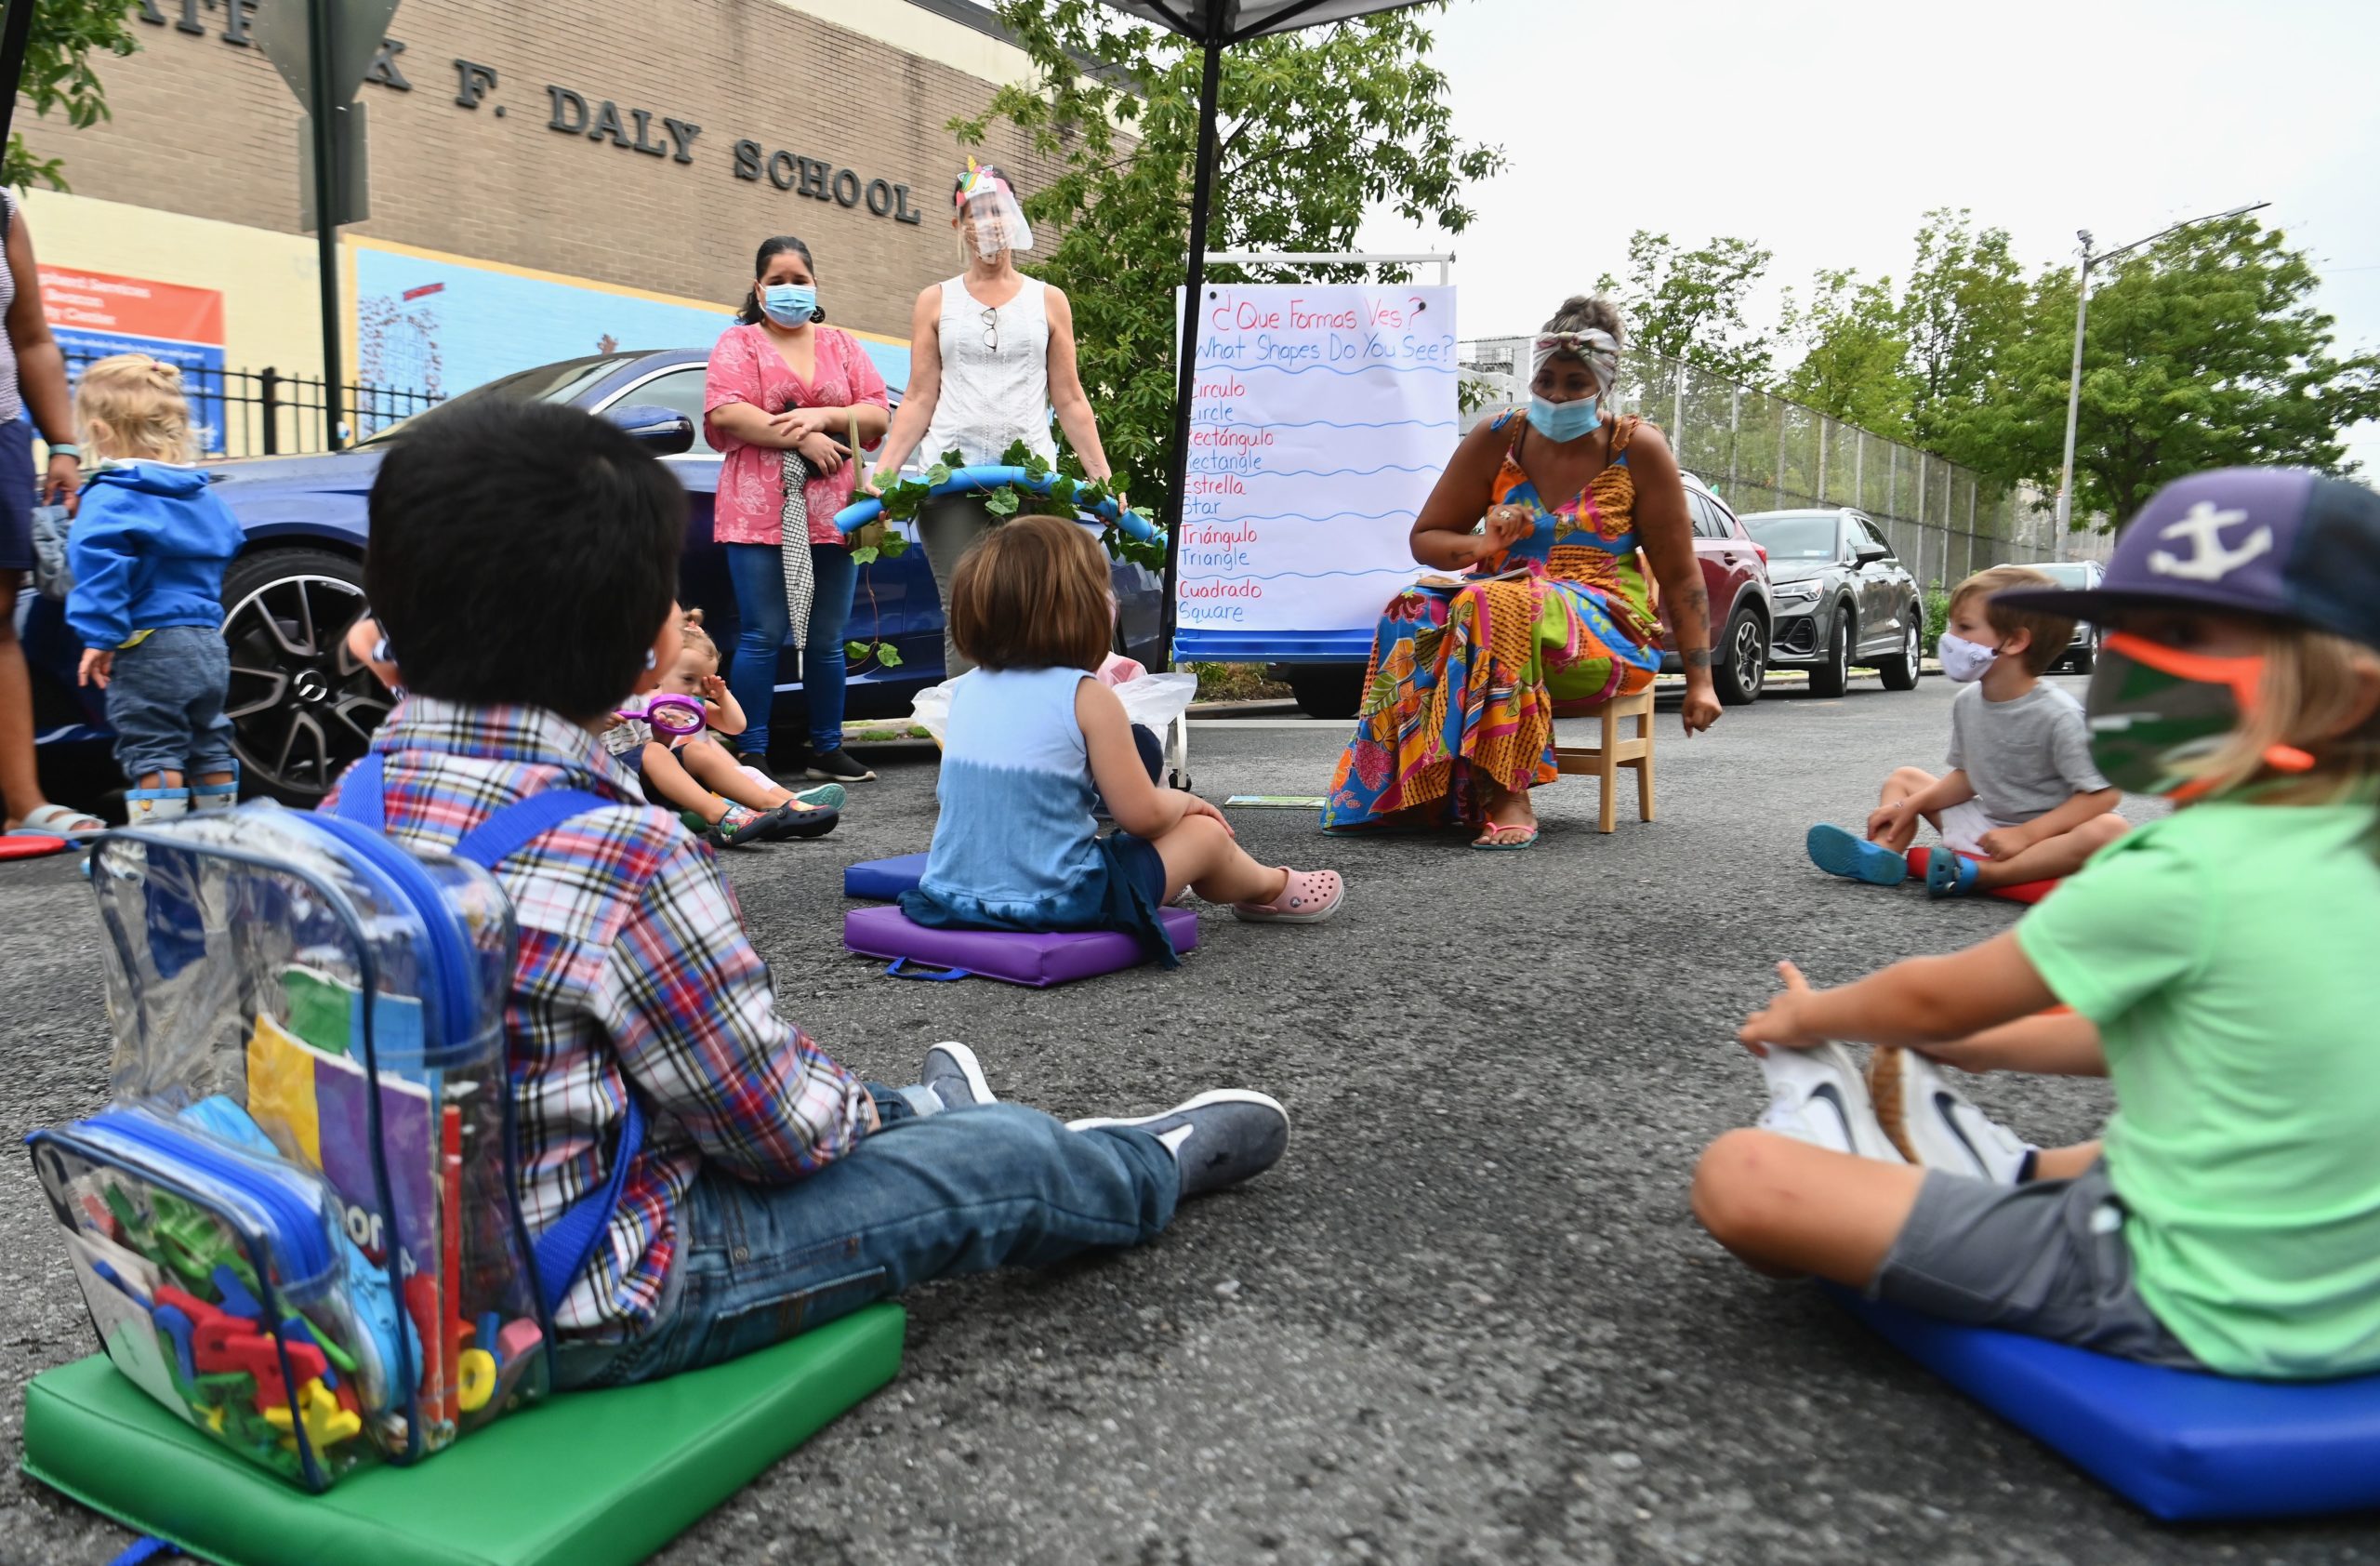 A teacher conducts a lesson with students during an outdoor learning demonstration for New York City schools in front of the Patrick F. Daly public school (P.S. 15) on September 2, 2020 in the Brooklyn borough of New York City. (Photo by Angela Weiss / AFP) (Photo by ANGELA WEISS/AFP via Getty Images)